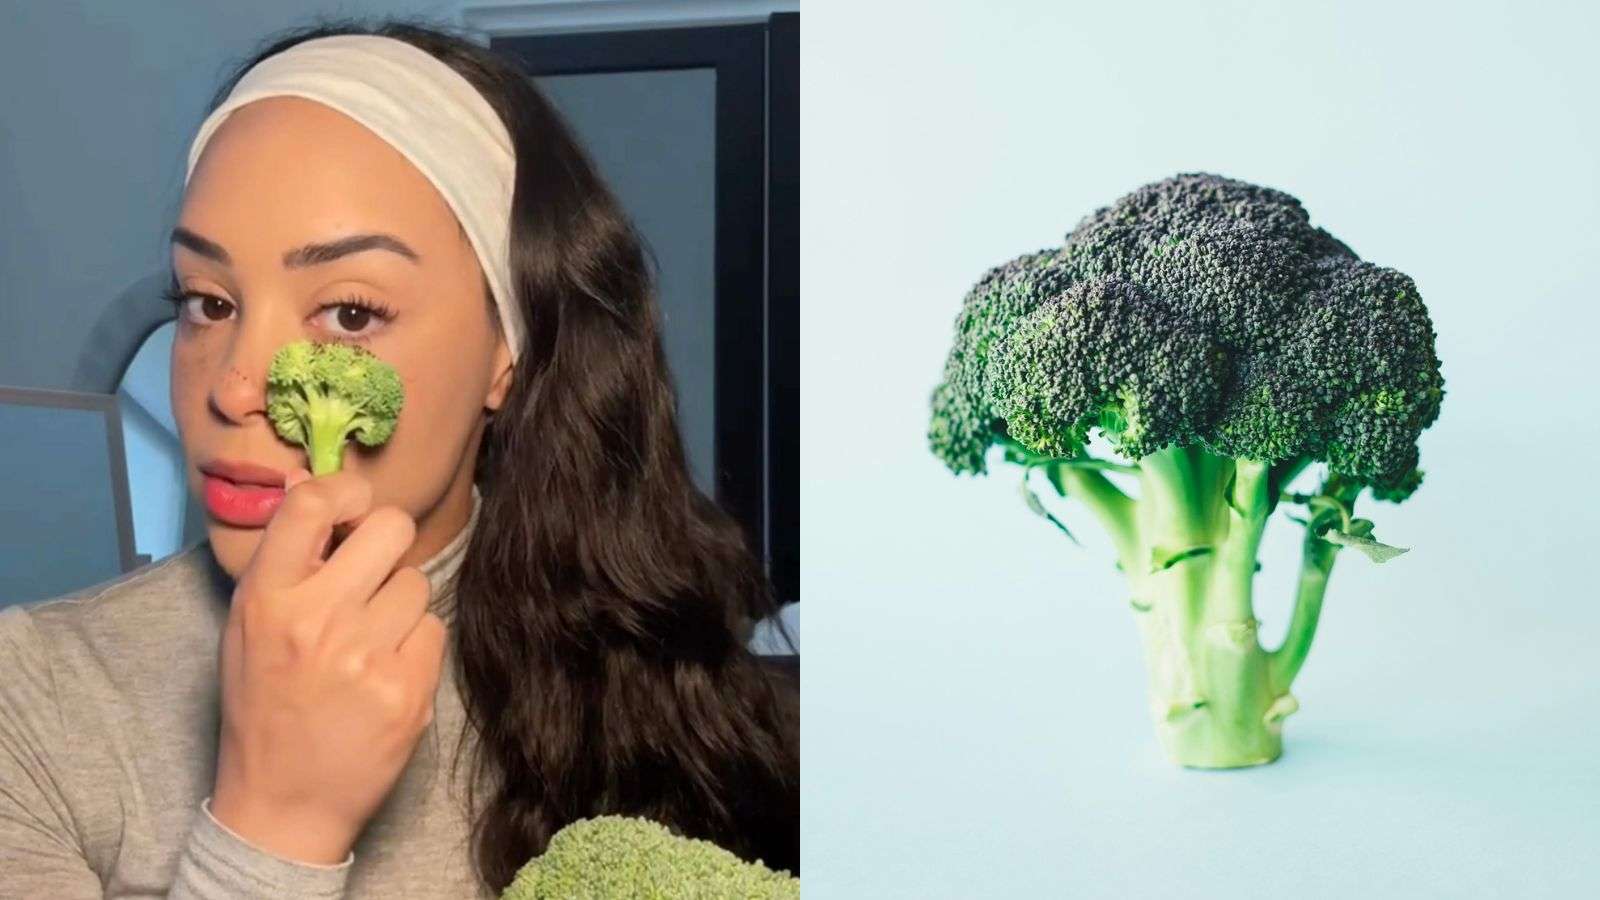 Woman using broccoli to add fake freckles on her cheeks